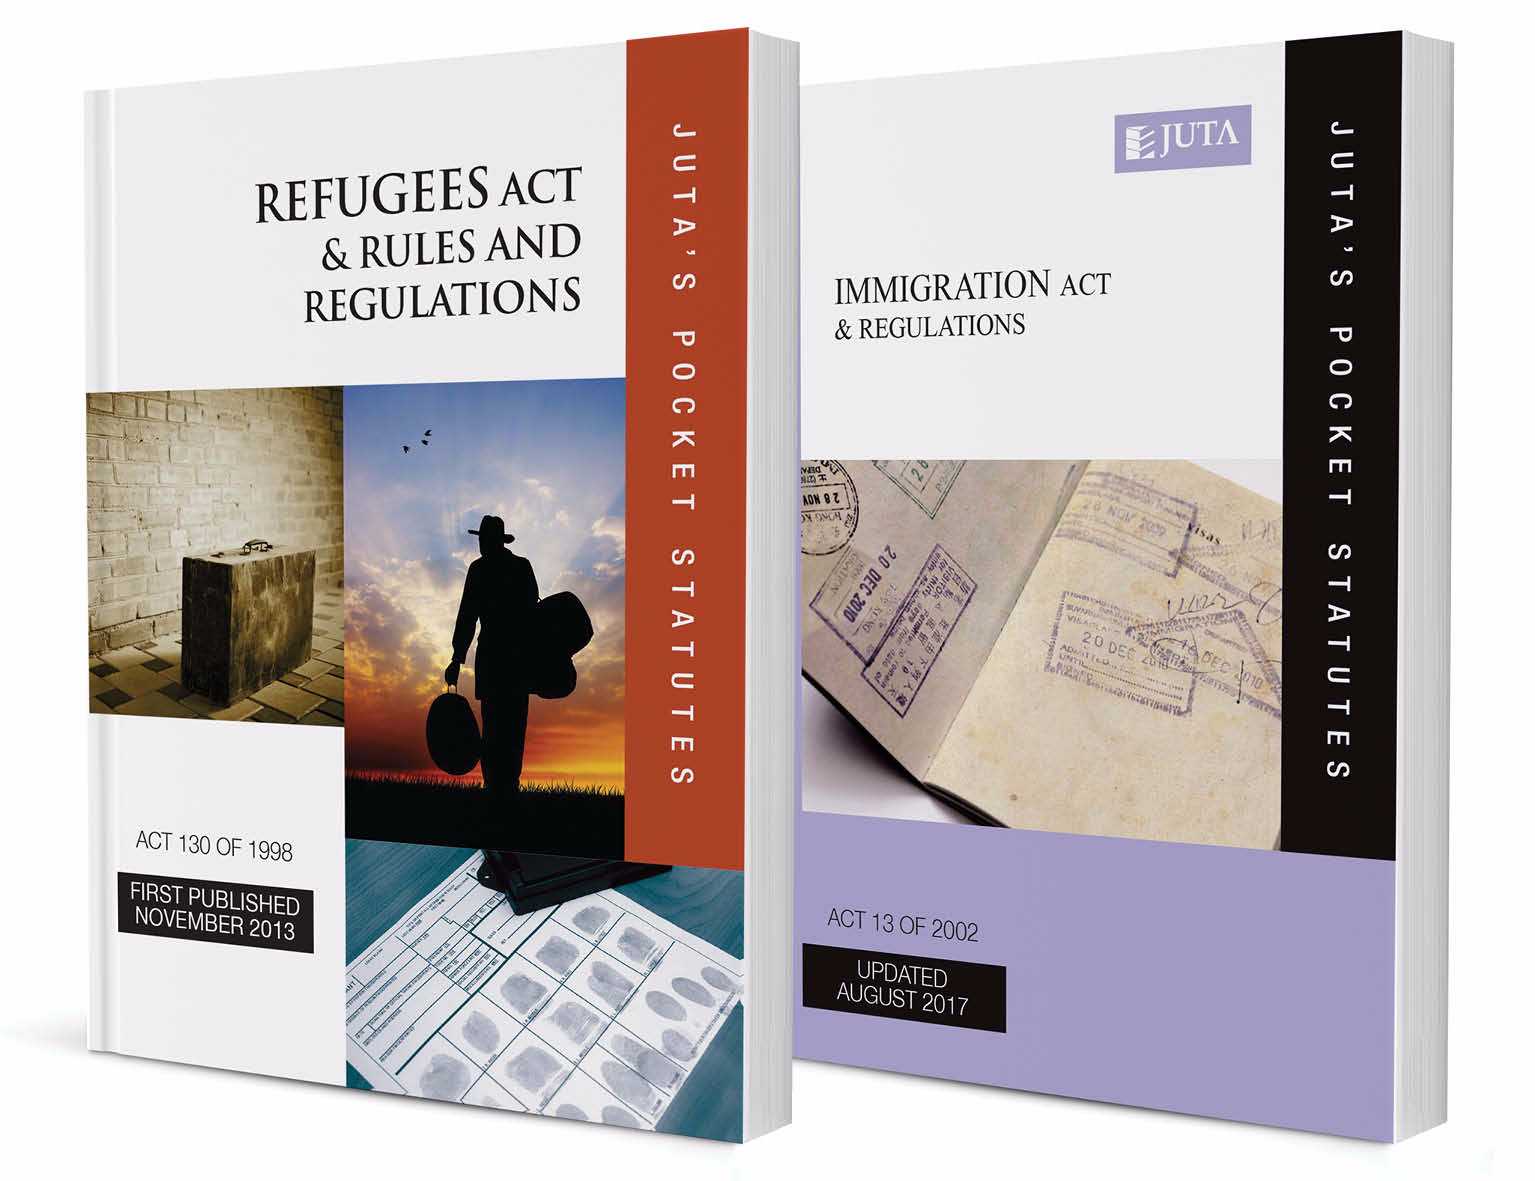 Refugees Act 130 of 1998 & Rules and Regulations AND Immigration Act 13 of 2002 & Regulations